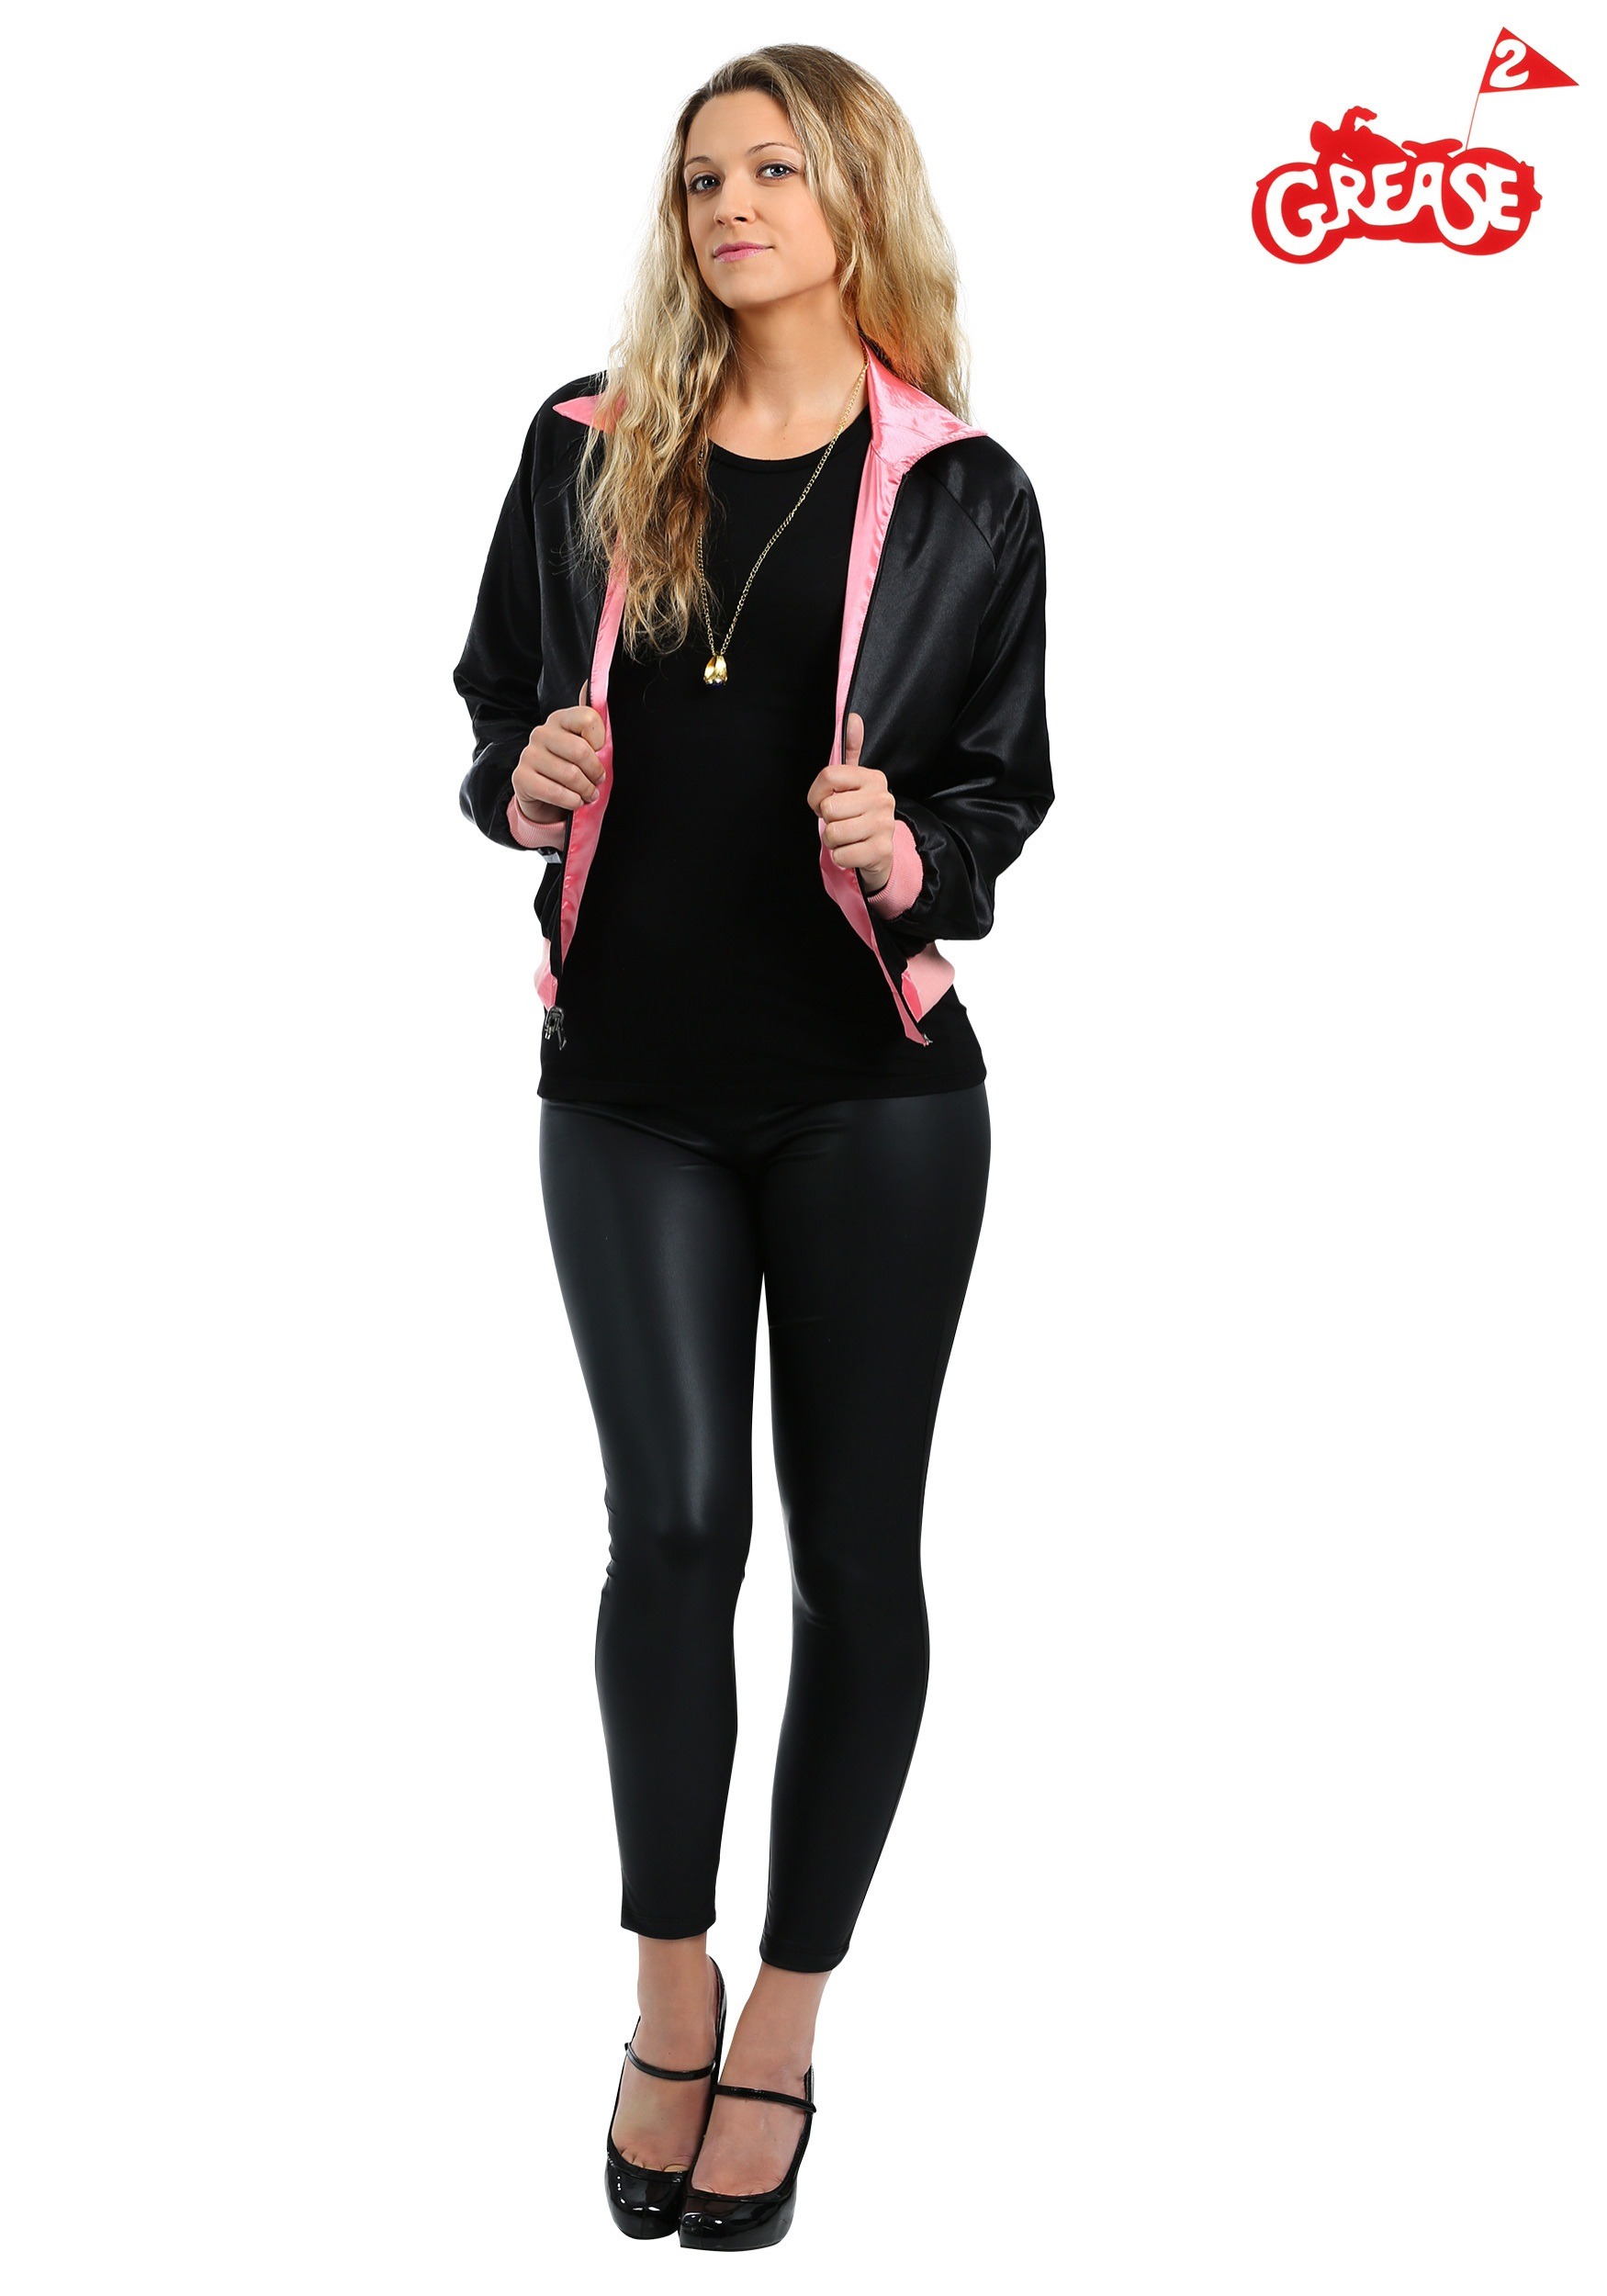 pink lady grease jacket